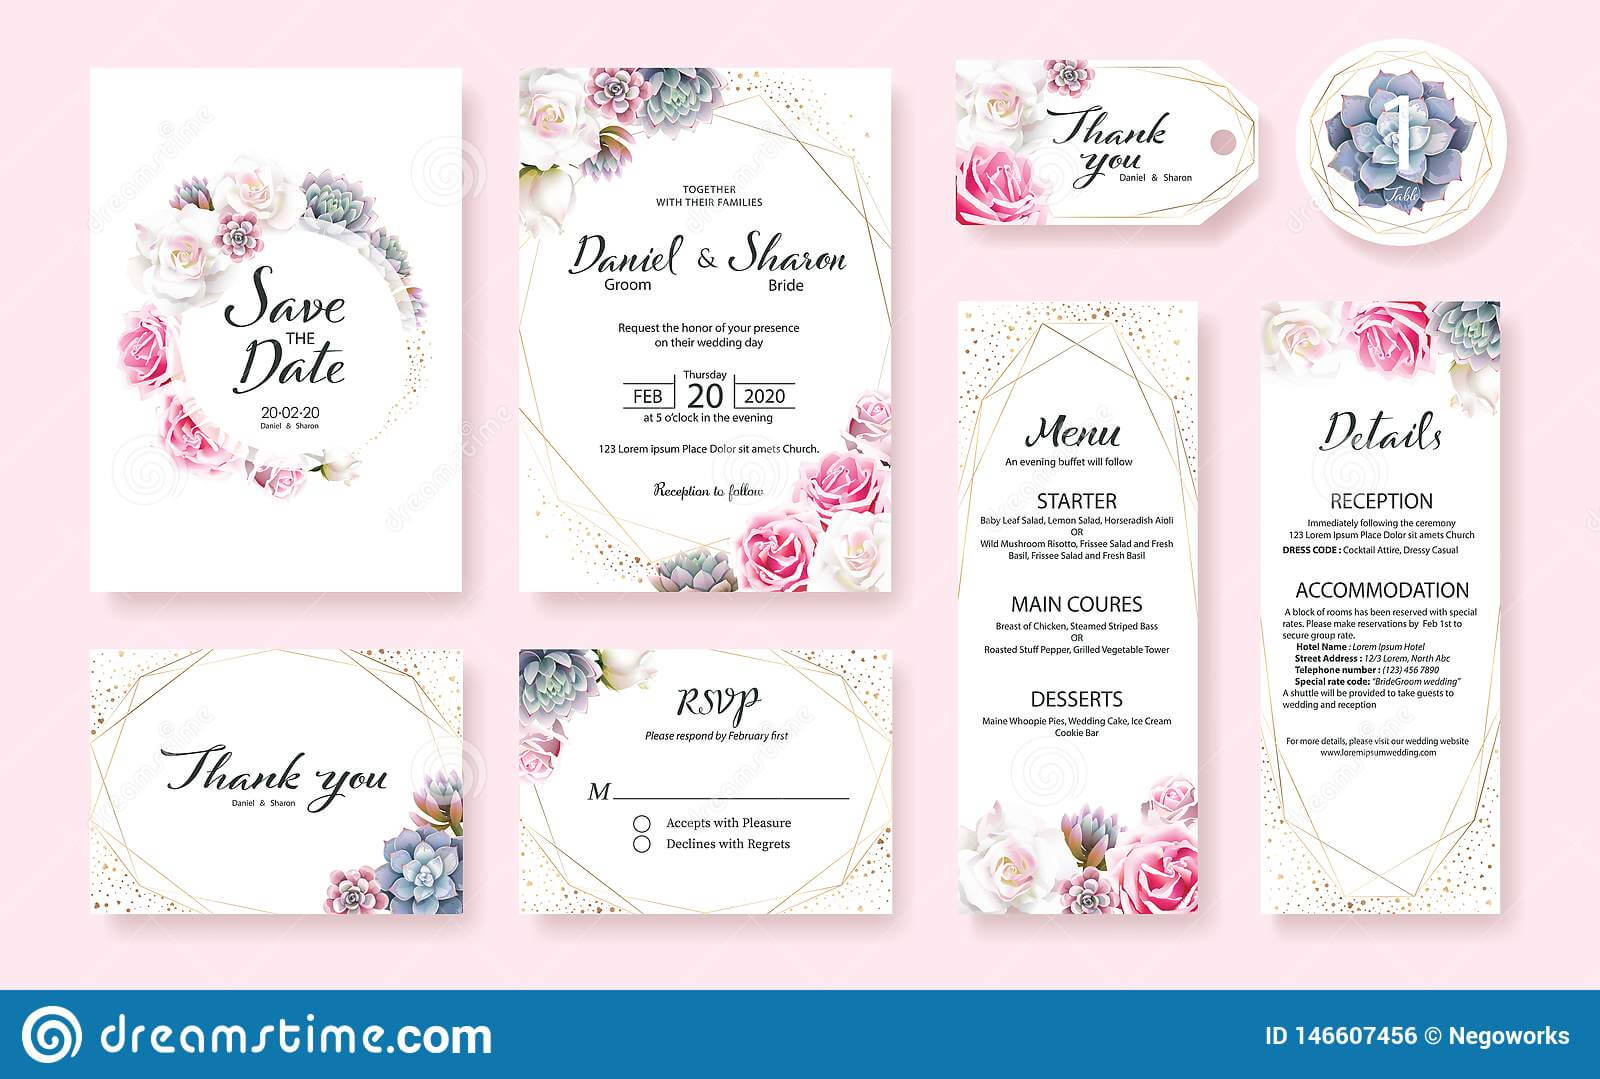 Floral Wedding Invitation Card, Save The Date, Thank You For Table Reservation Card Template